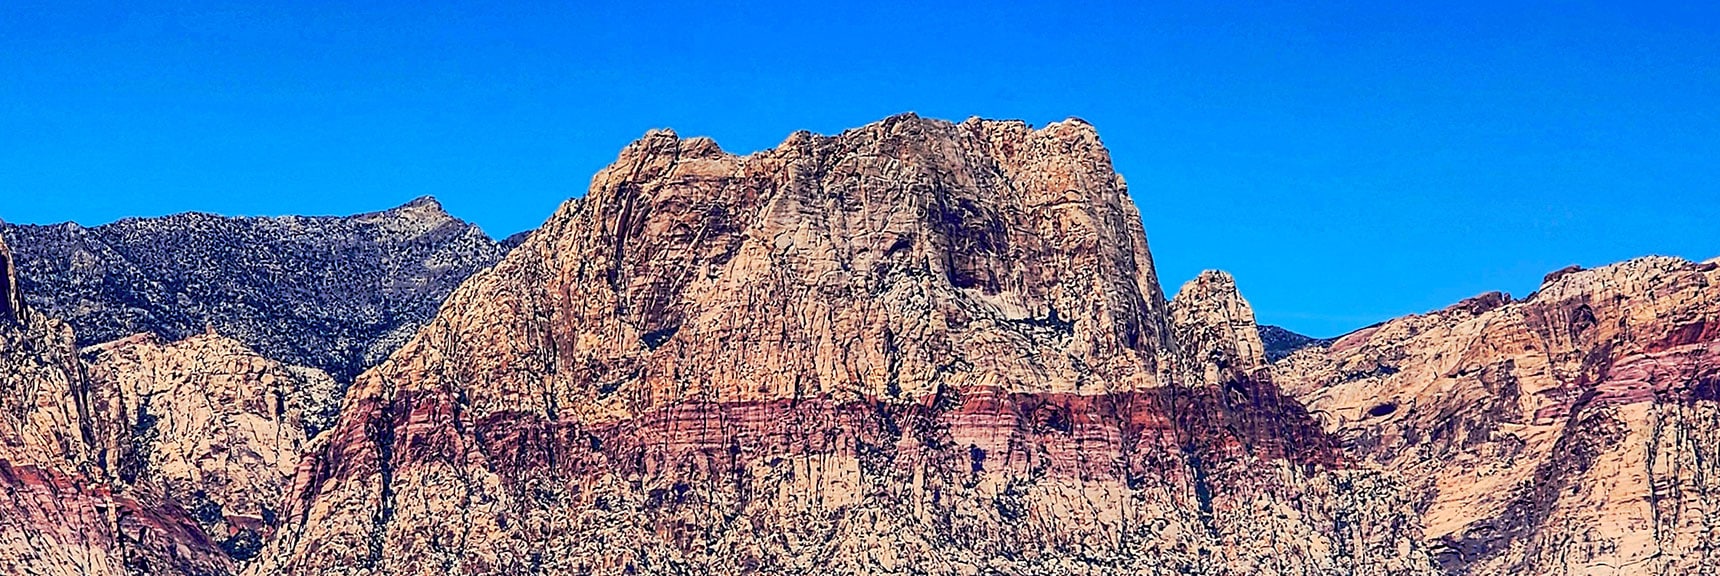 Next Comes the Tallest Mountain, Mt. Wilson. Note Darker Ridgeline Behind. | Blue Diamond Hill Southern Ridgelines | Red Rock Canyon, Nevada